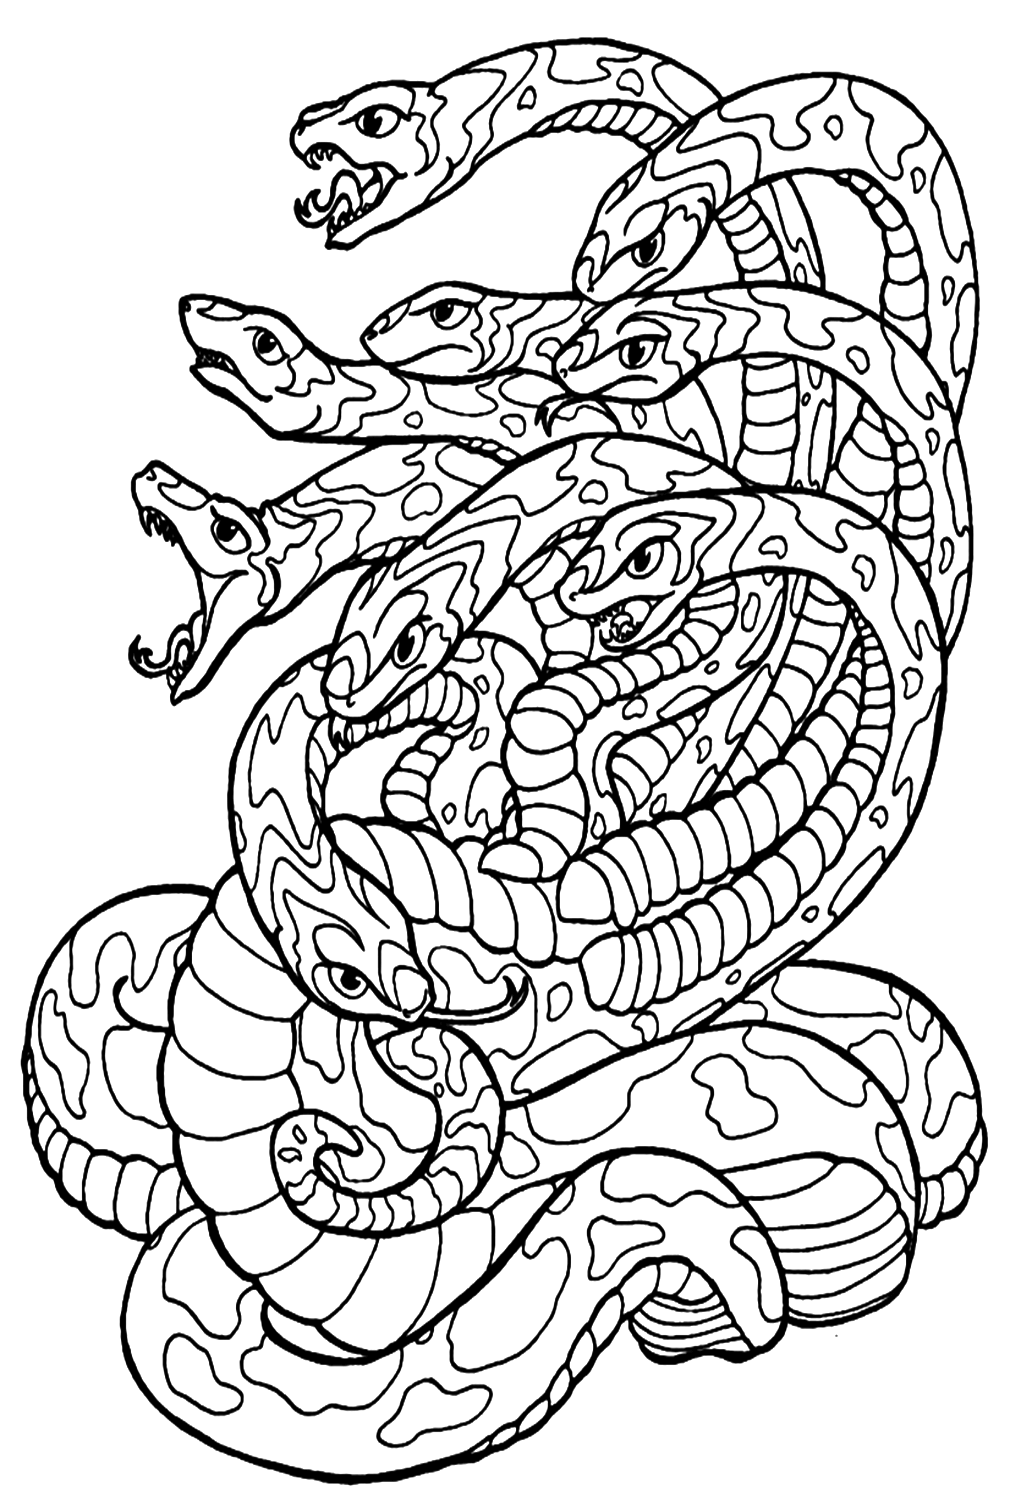 Hydra Coloring Page Coloring Pages